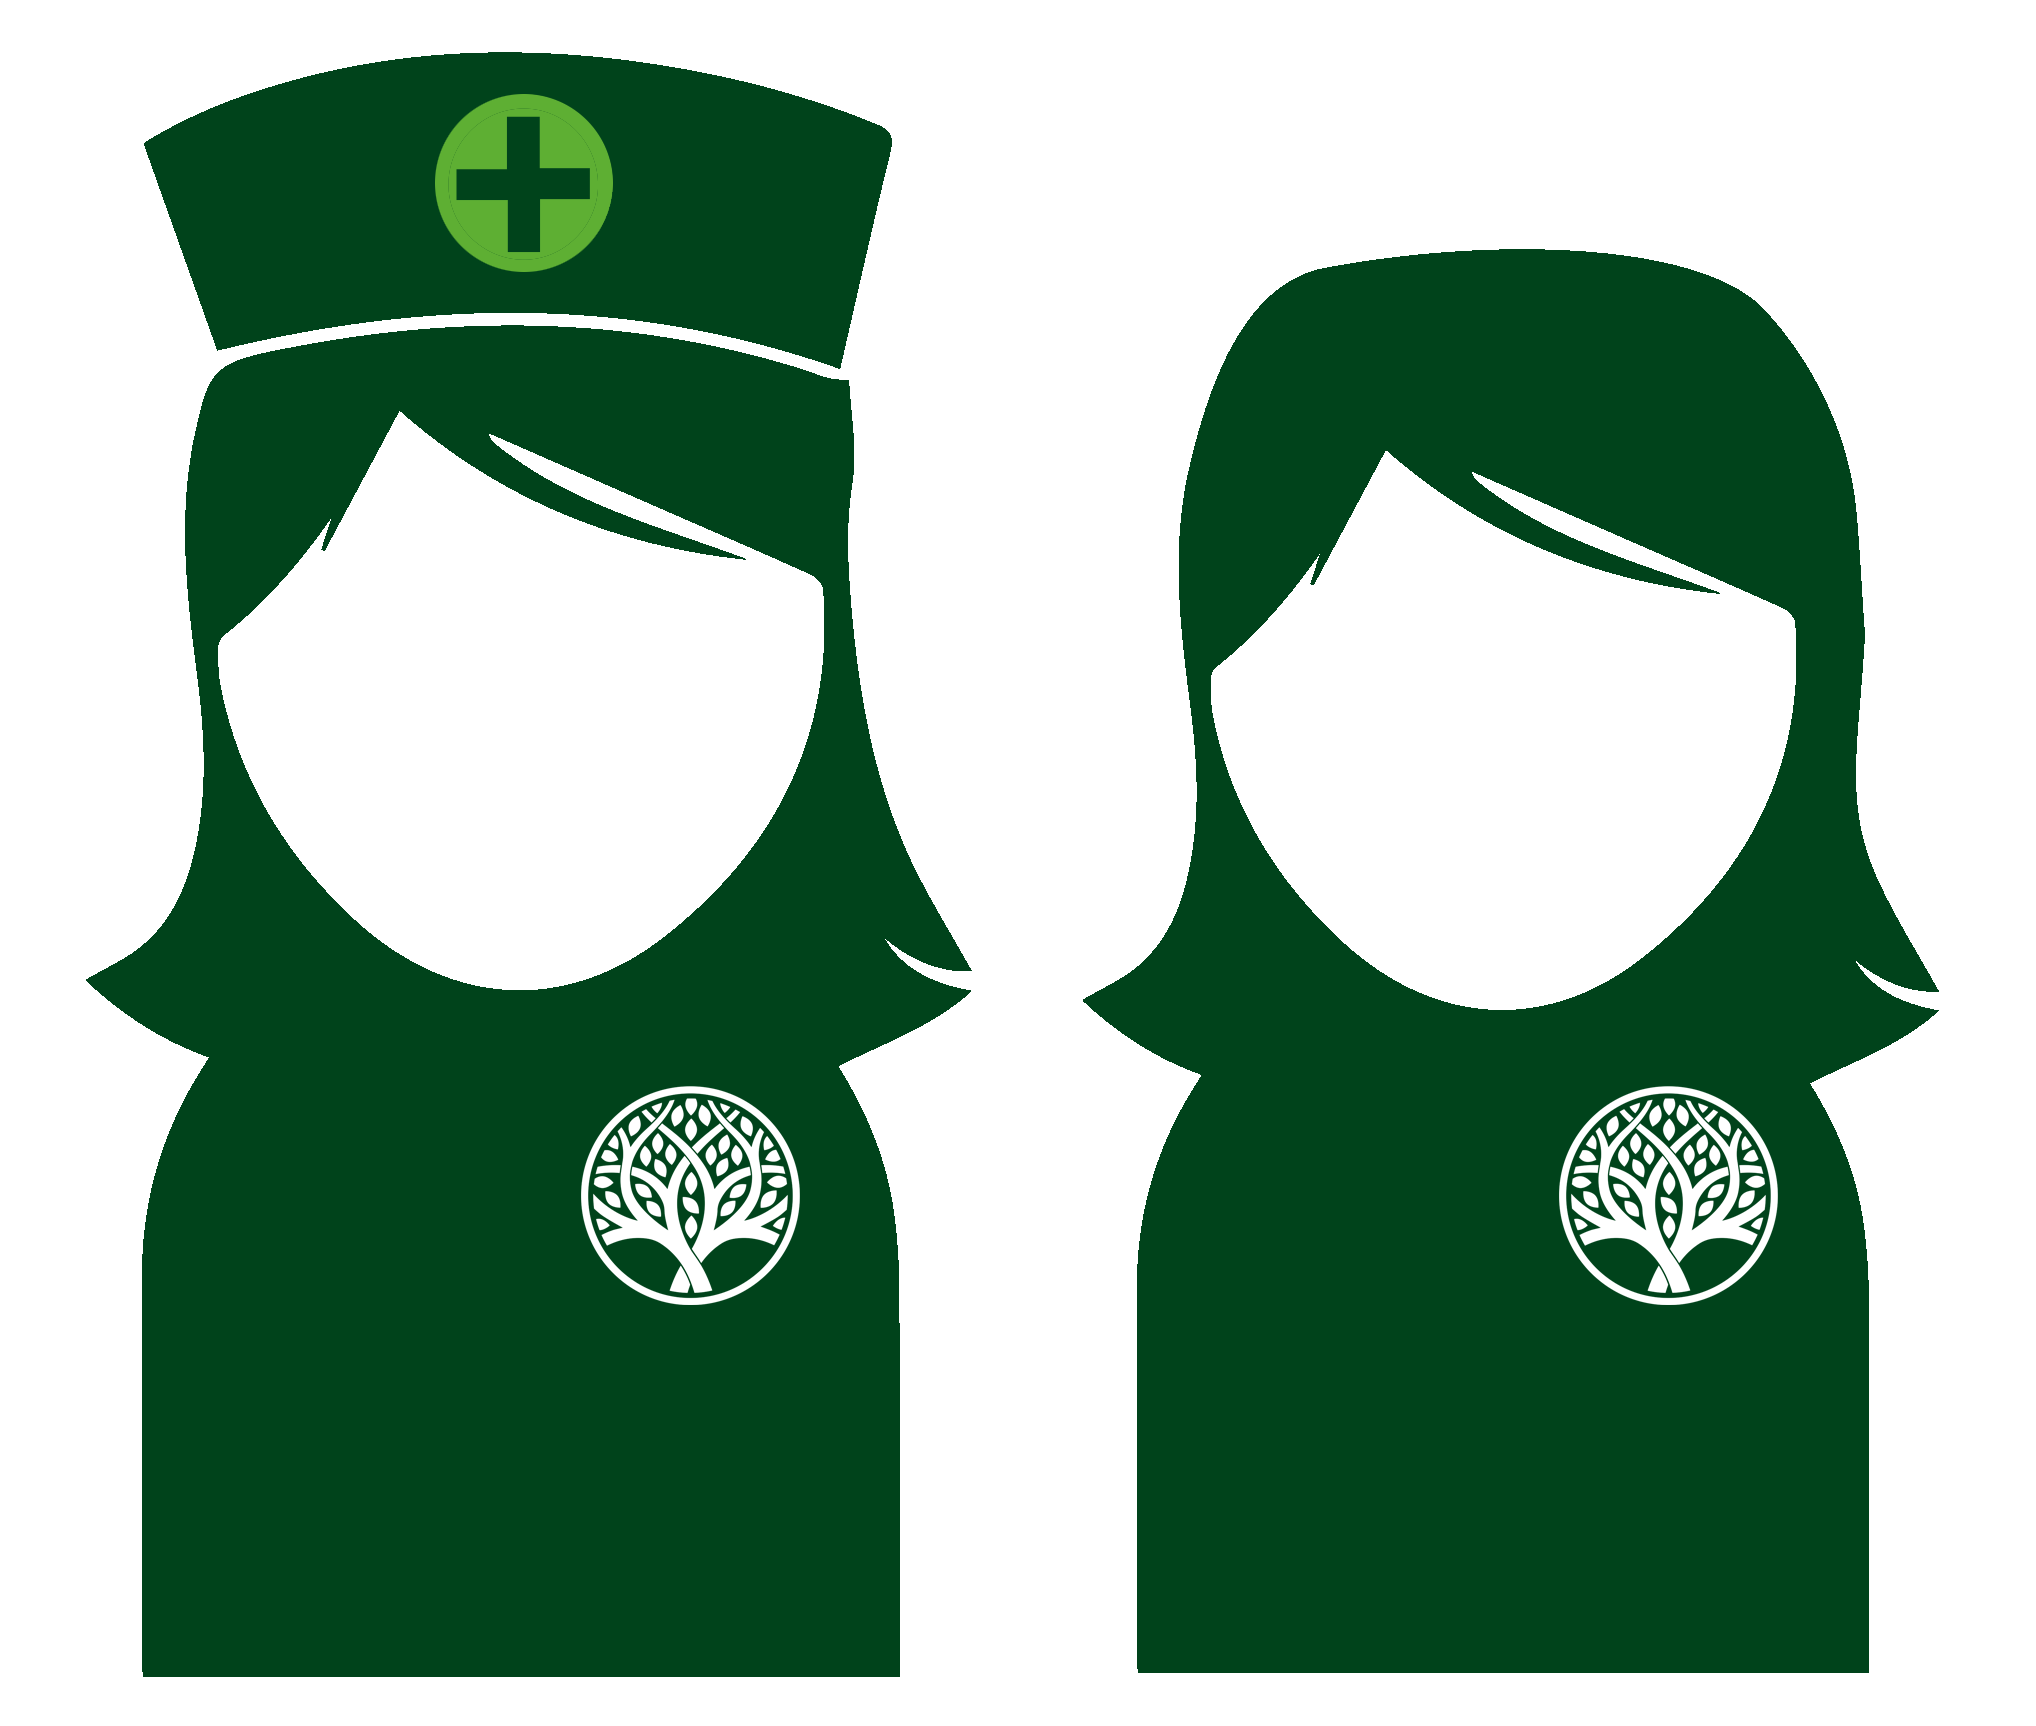 Graphic icons of nurse and coordinator